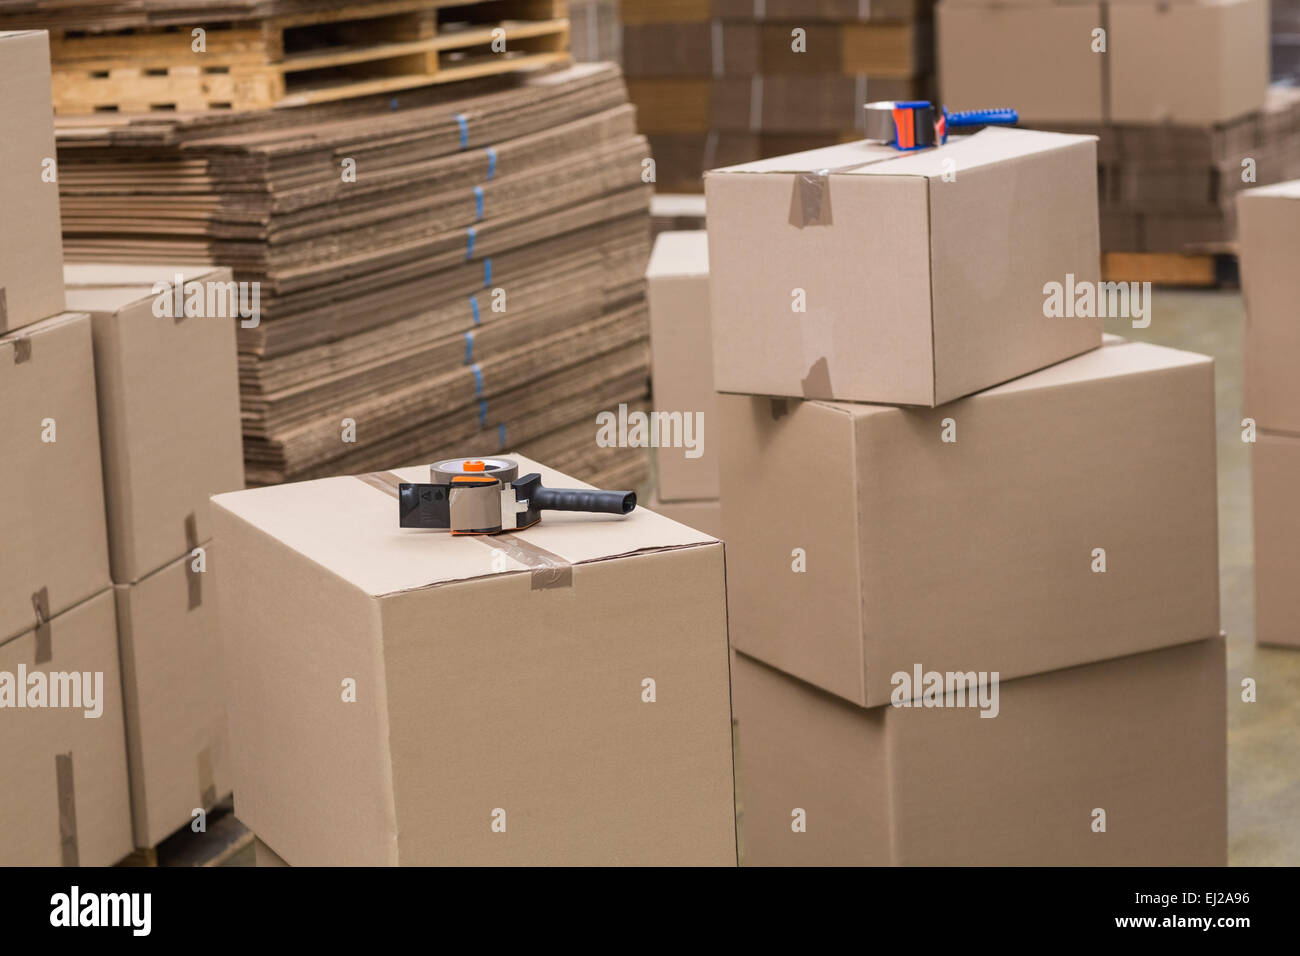 Preparation of goods for dispatch Stock Photo